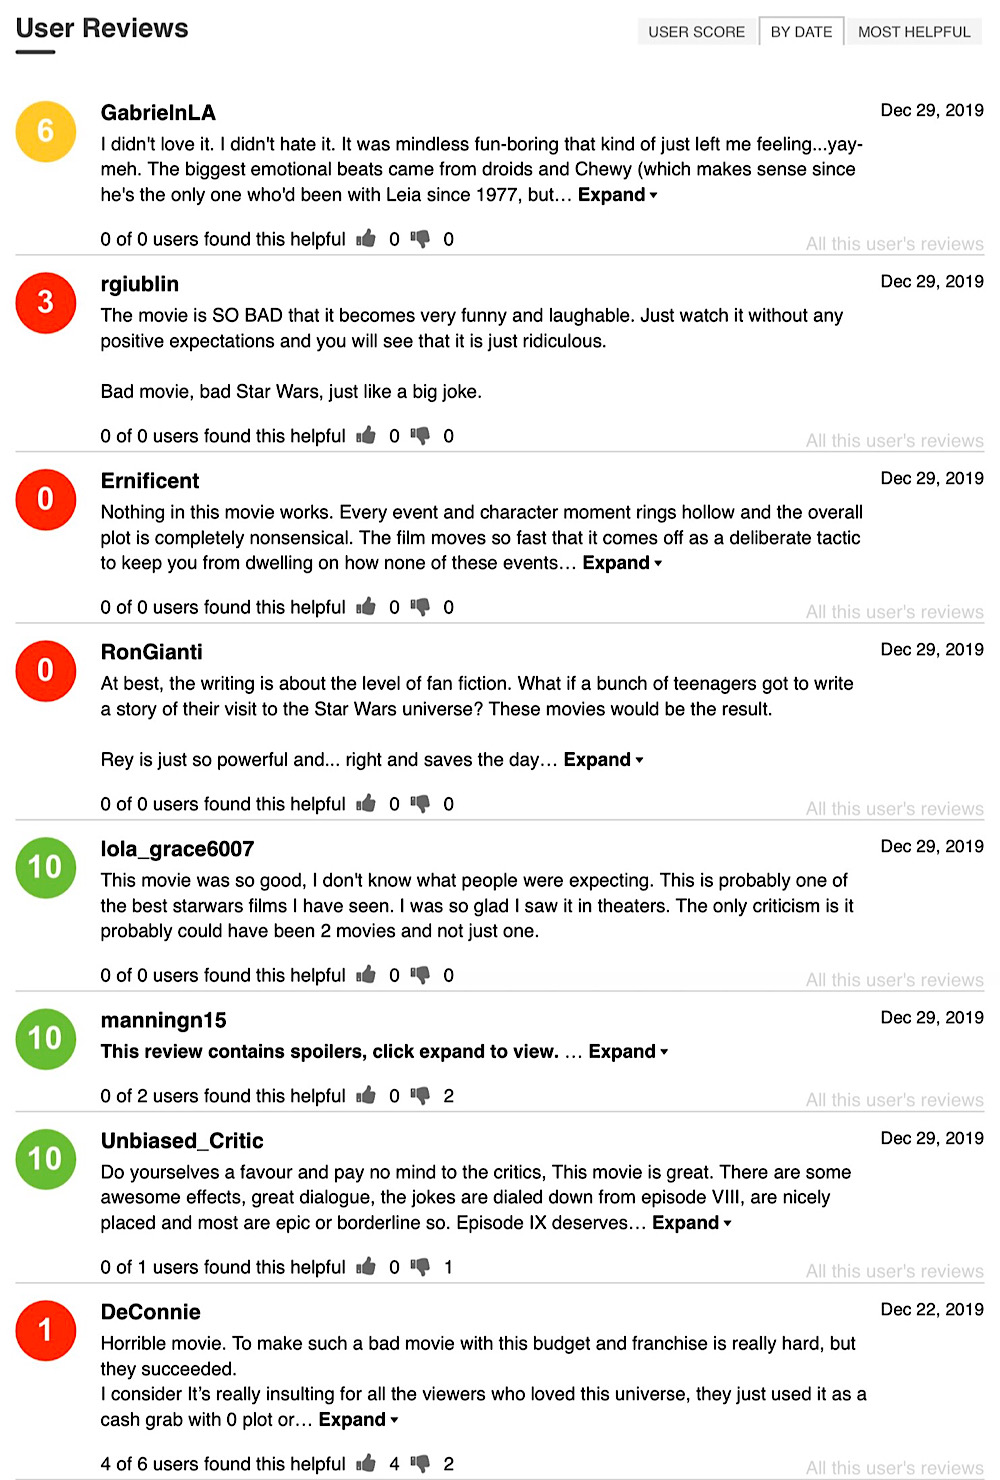 A sample of the more expansive and varied recent user reviews on Metacritic for Star Wars: The Rise of Skywalker